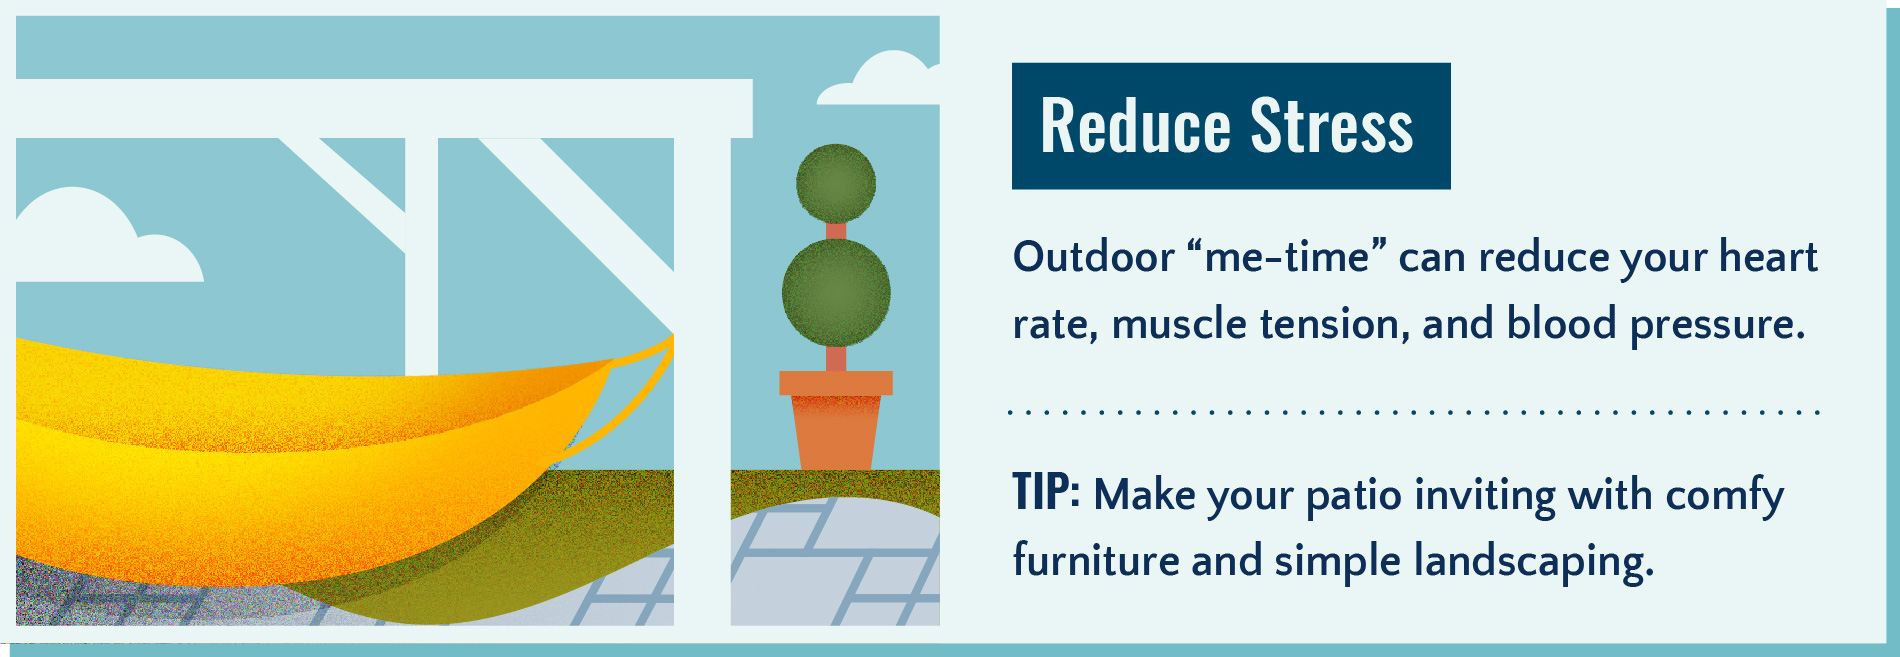 Spending time outdoors reduces stress.